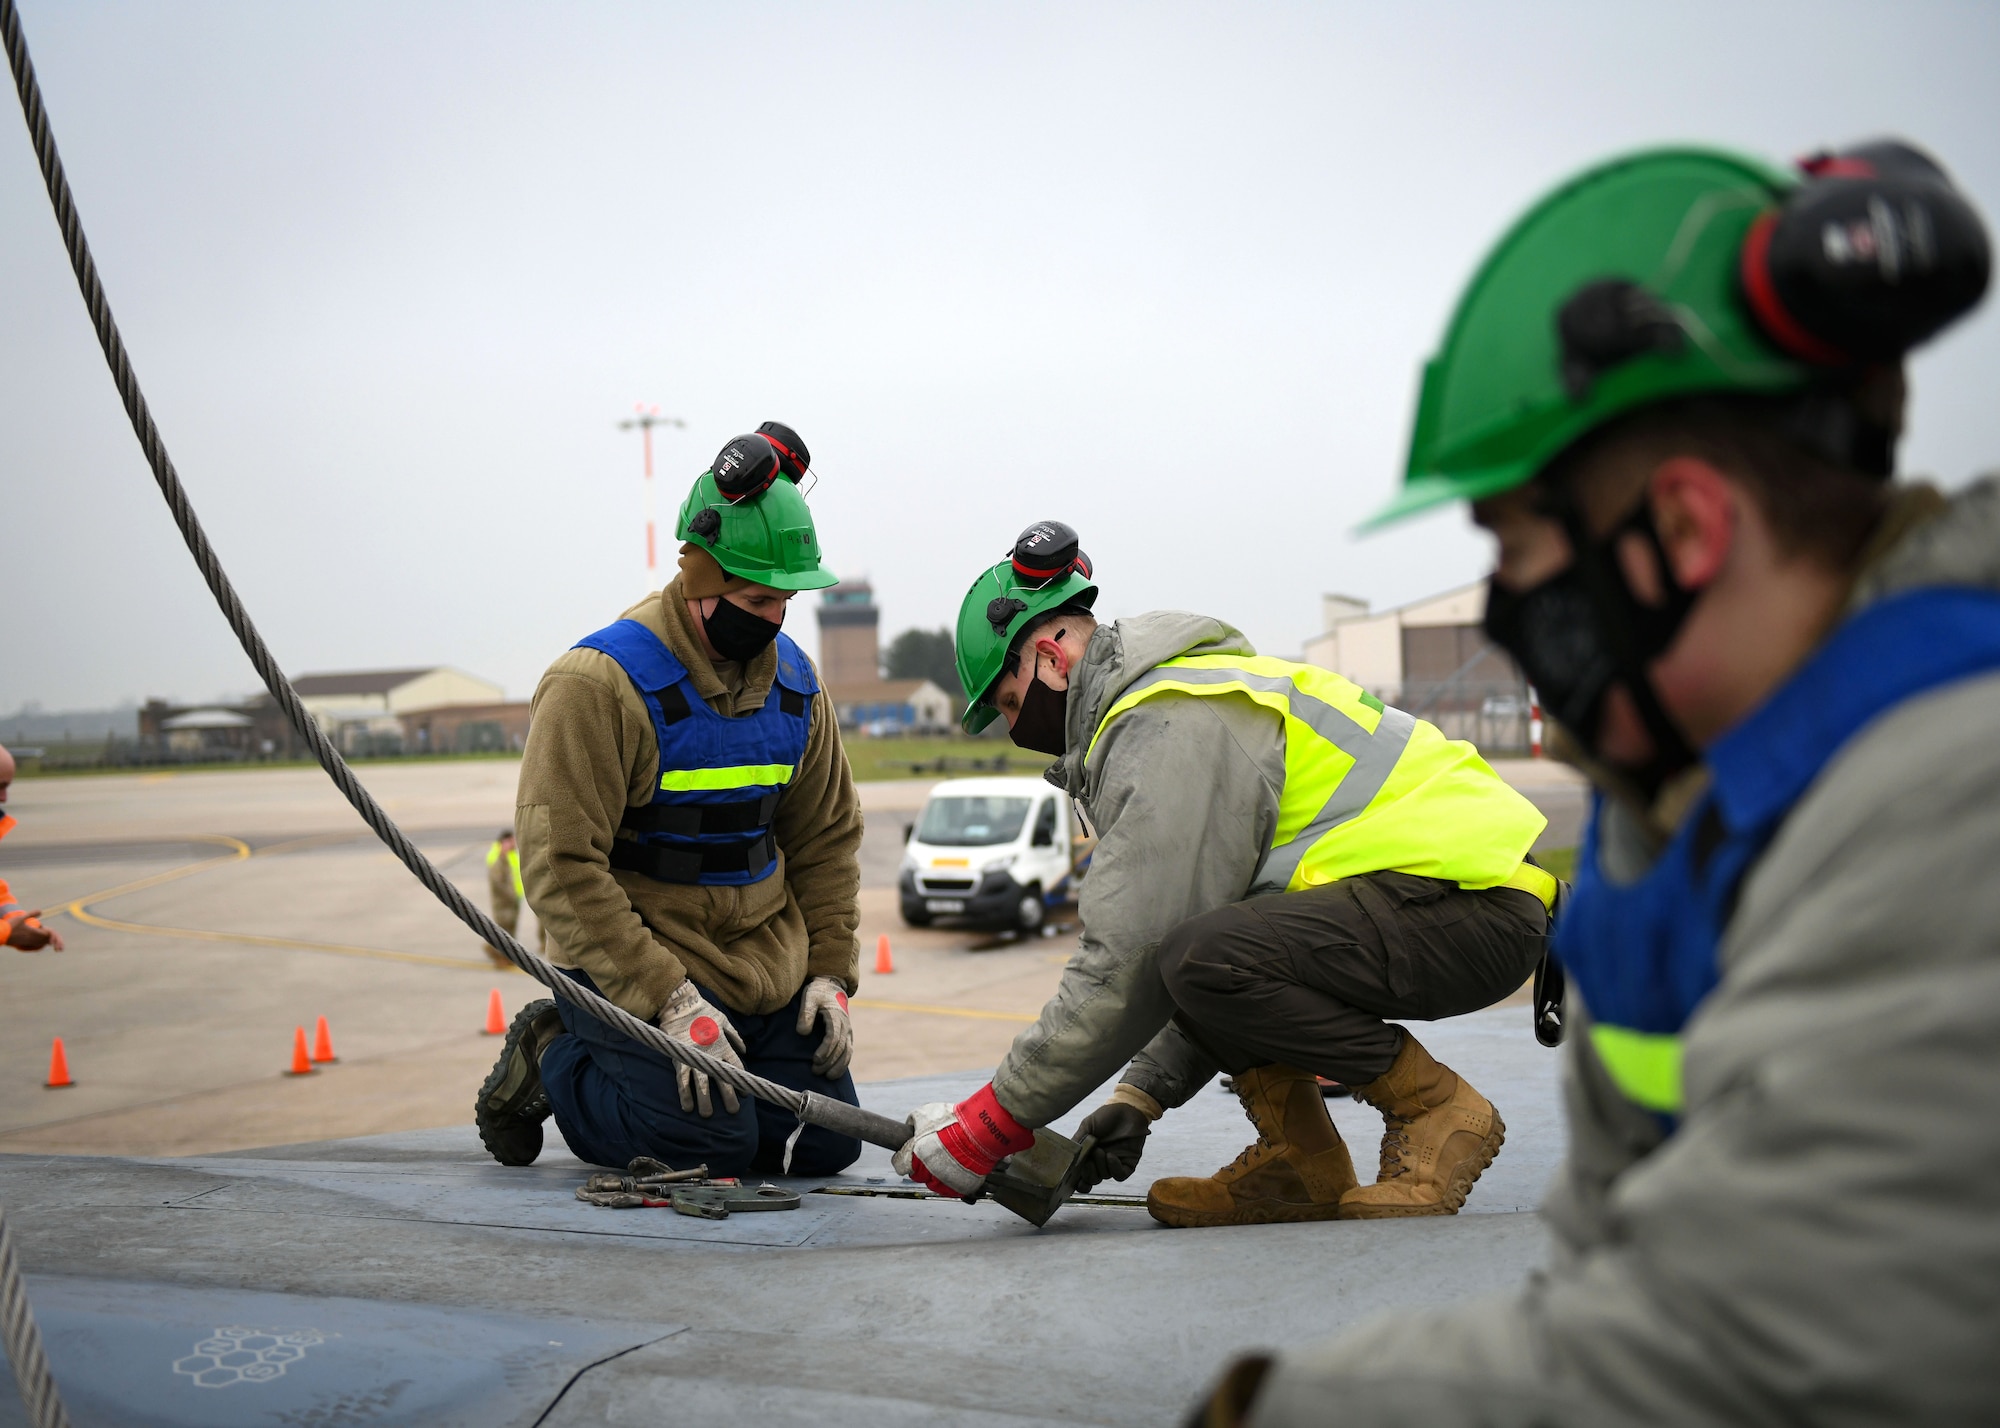 Airmen assigned to the 48th Equipment Maintenance Squadron repair and reclamation sections attach an aircraft sling as part of the Crash Damaged Disabled Aircraft Recovery program during a simulated aircraft lift at Royal Air Force Lakenheath, England, Dec. 29, 2020. The CDDAR program ensures members are ready and postured to provide the Liberty Wing with emergency crash and recovery capabilities if necessary.  (U.S. Air Force photo by Senior Airman Madeline Herzog)